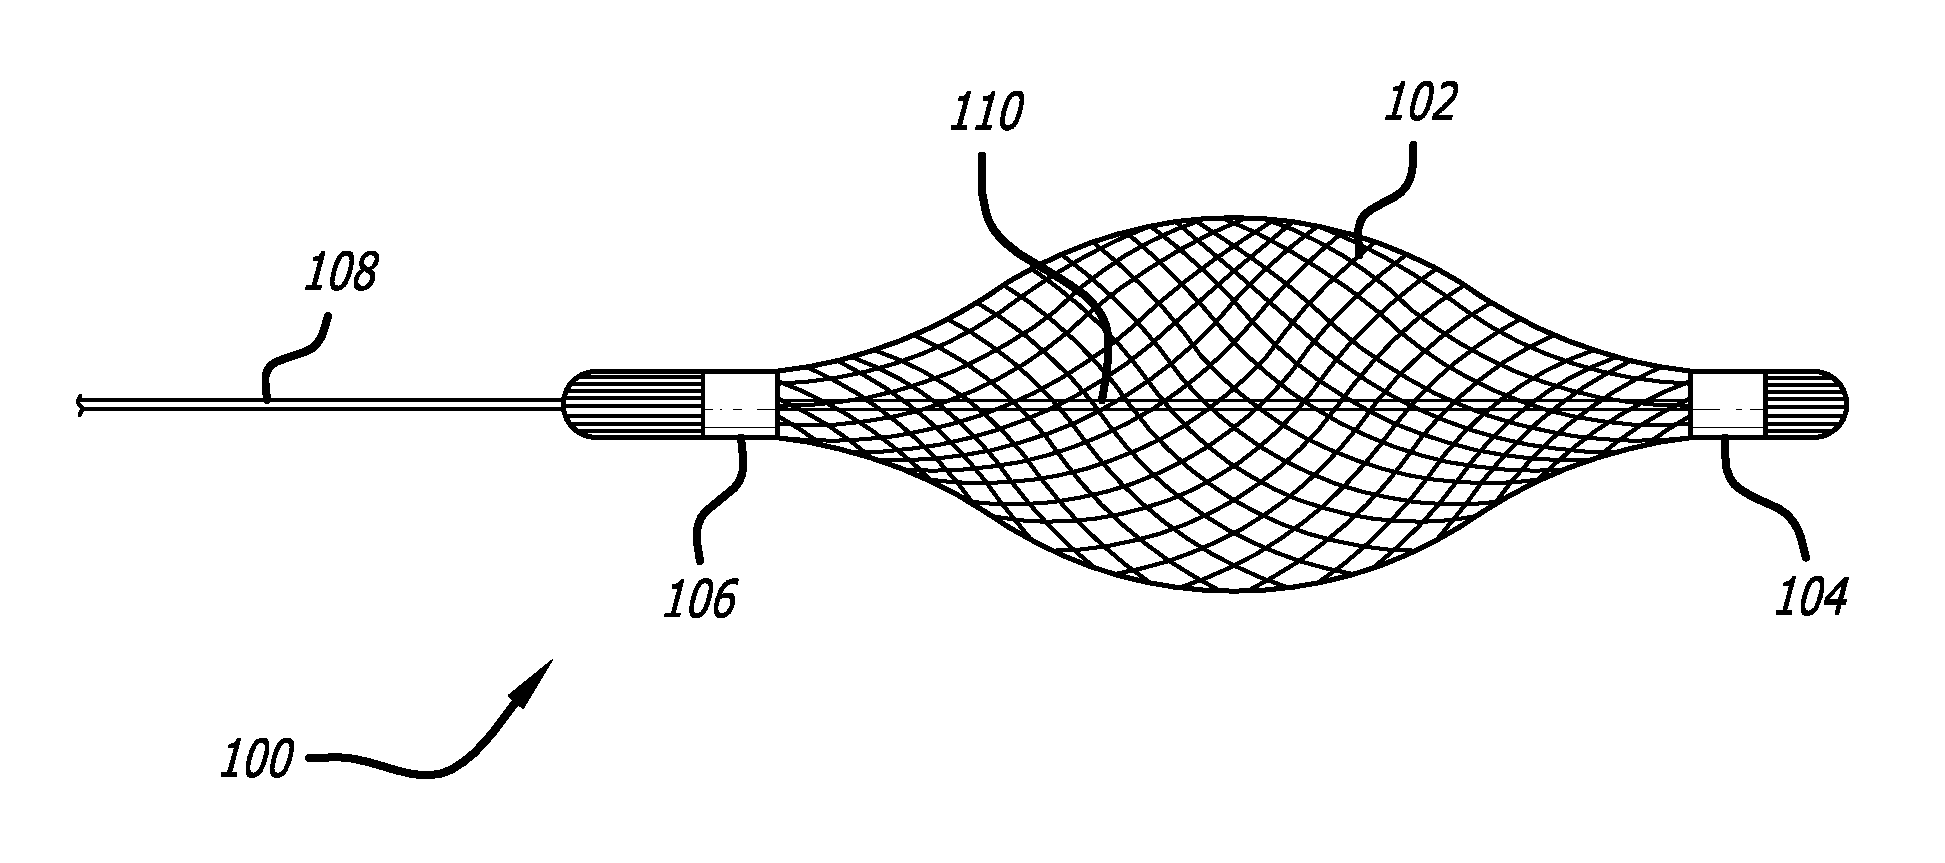 Delivery Tool For Percutaneous Delivery Of A Prosthesis